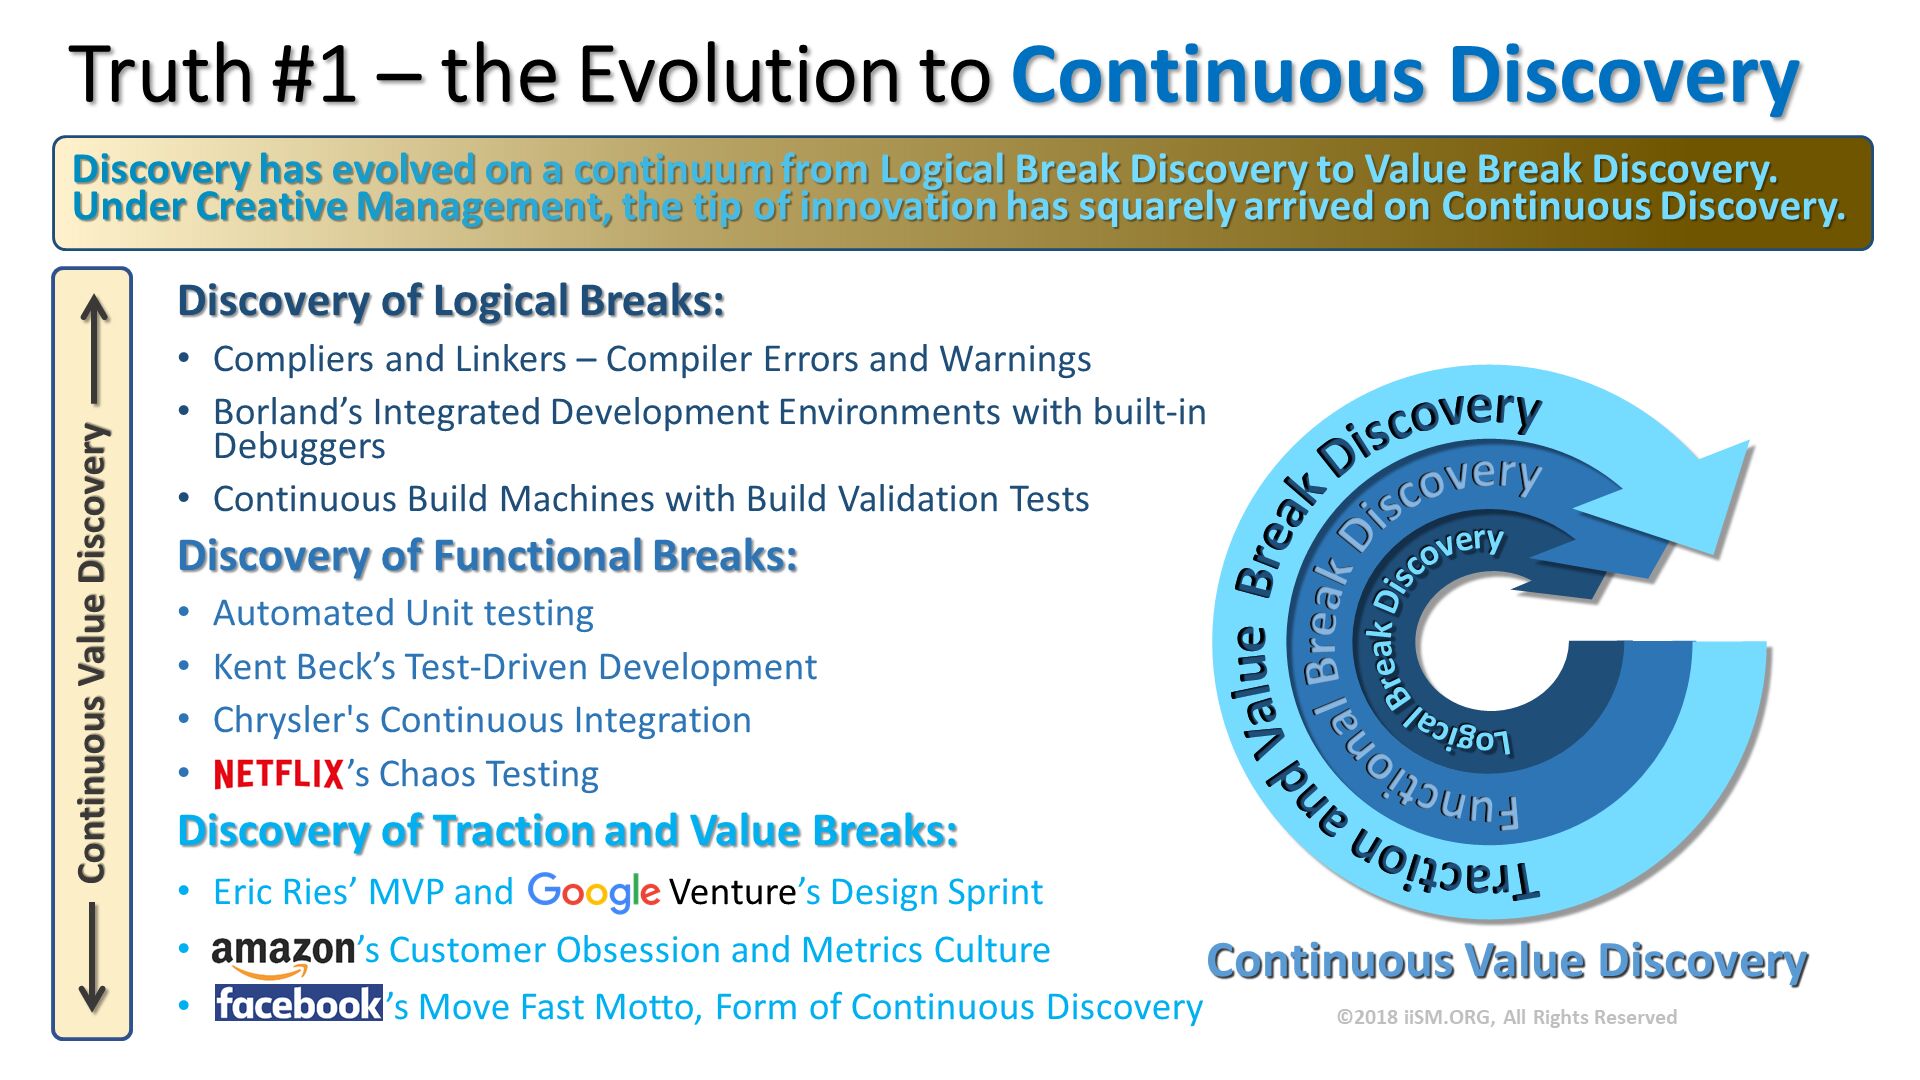 Truth #1 – the Evolution to Continuous Discovery. Discovery of Logical Breaks:
Compliers and Linkers – Compiler Errors and Warnings
Borland’s Integrated Development Environments with built-in Debuggers
Continuous Build Machines with Build Validation Tests
Discovery of Functional Breaks:
Automated Unit testing
Kent Beck’s Test-Driven Development
Chrysler's Continuous Integration
NETFLIX’s Chaos Testing 
Discovery of Traction and Value Breaks:
Eric Ries’ MVP and                 Venture’s Design Sprint
                ’s Customer Obsession and Metrics Culture
Facebook  ’s Move Fast Motto, Form of Continuous Discovery . Discovery has evolved on a continuum from Logical Break Discovery to Value Break Discovery.  Under Creative Management, the tip of innovation has squarely arrived on Continuous Discovery. 